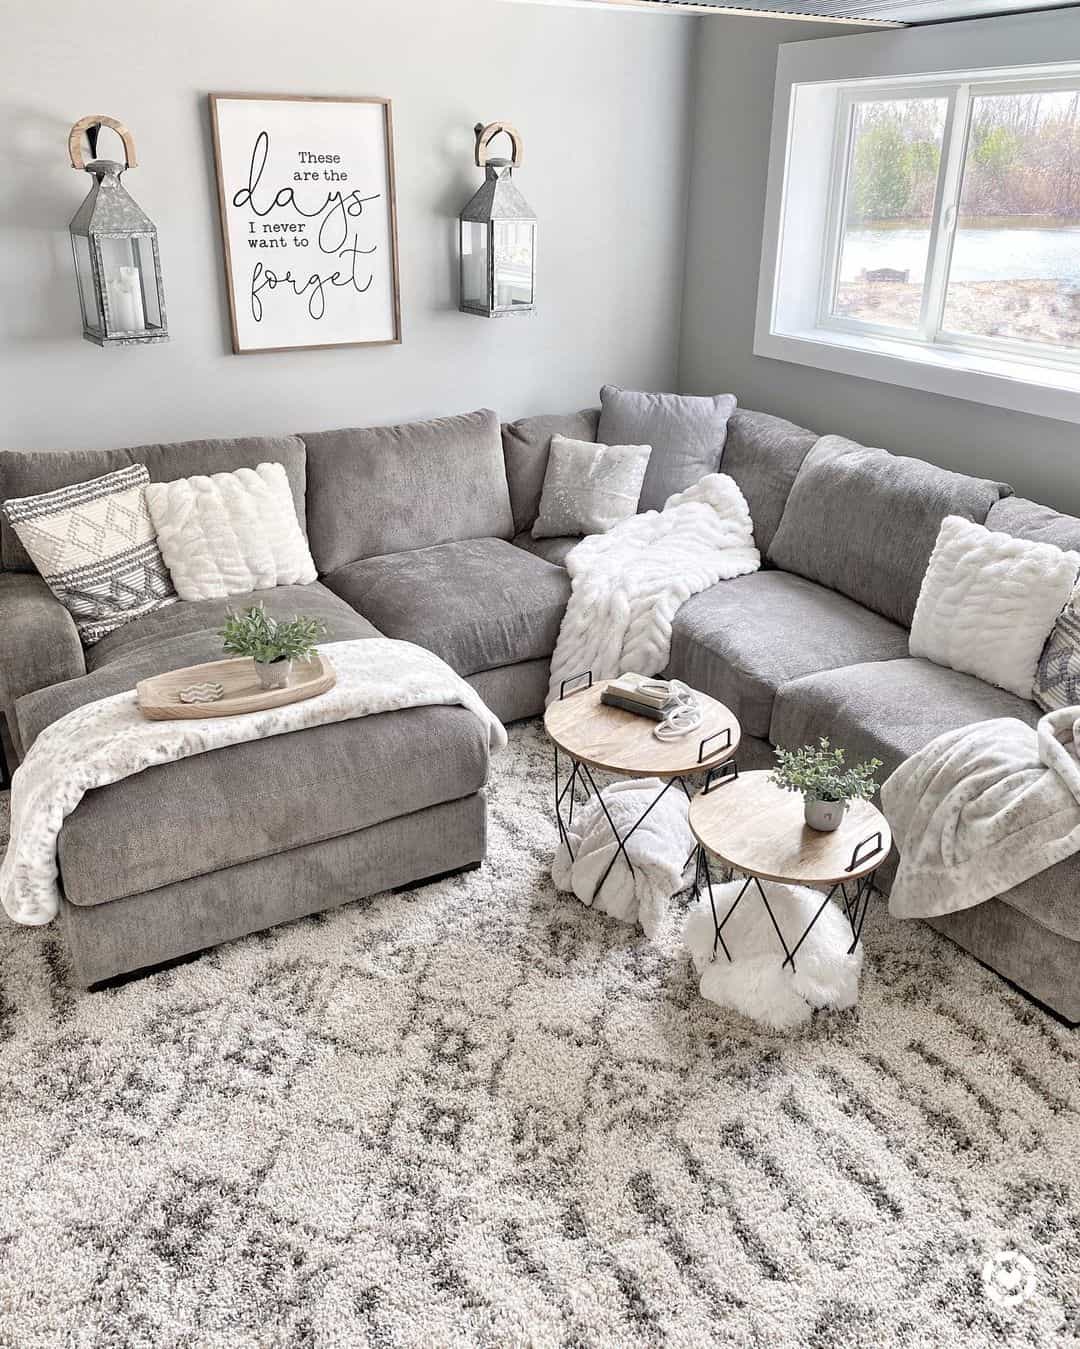 https://www.soulandlane.com/wp-content/uploads/2022/11/Grey-Couch-Living-Room-Ideas-with-Rug.jpg